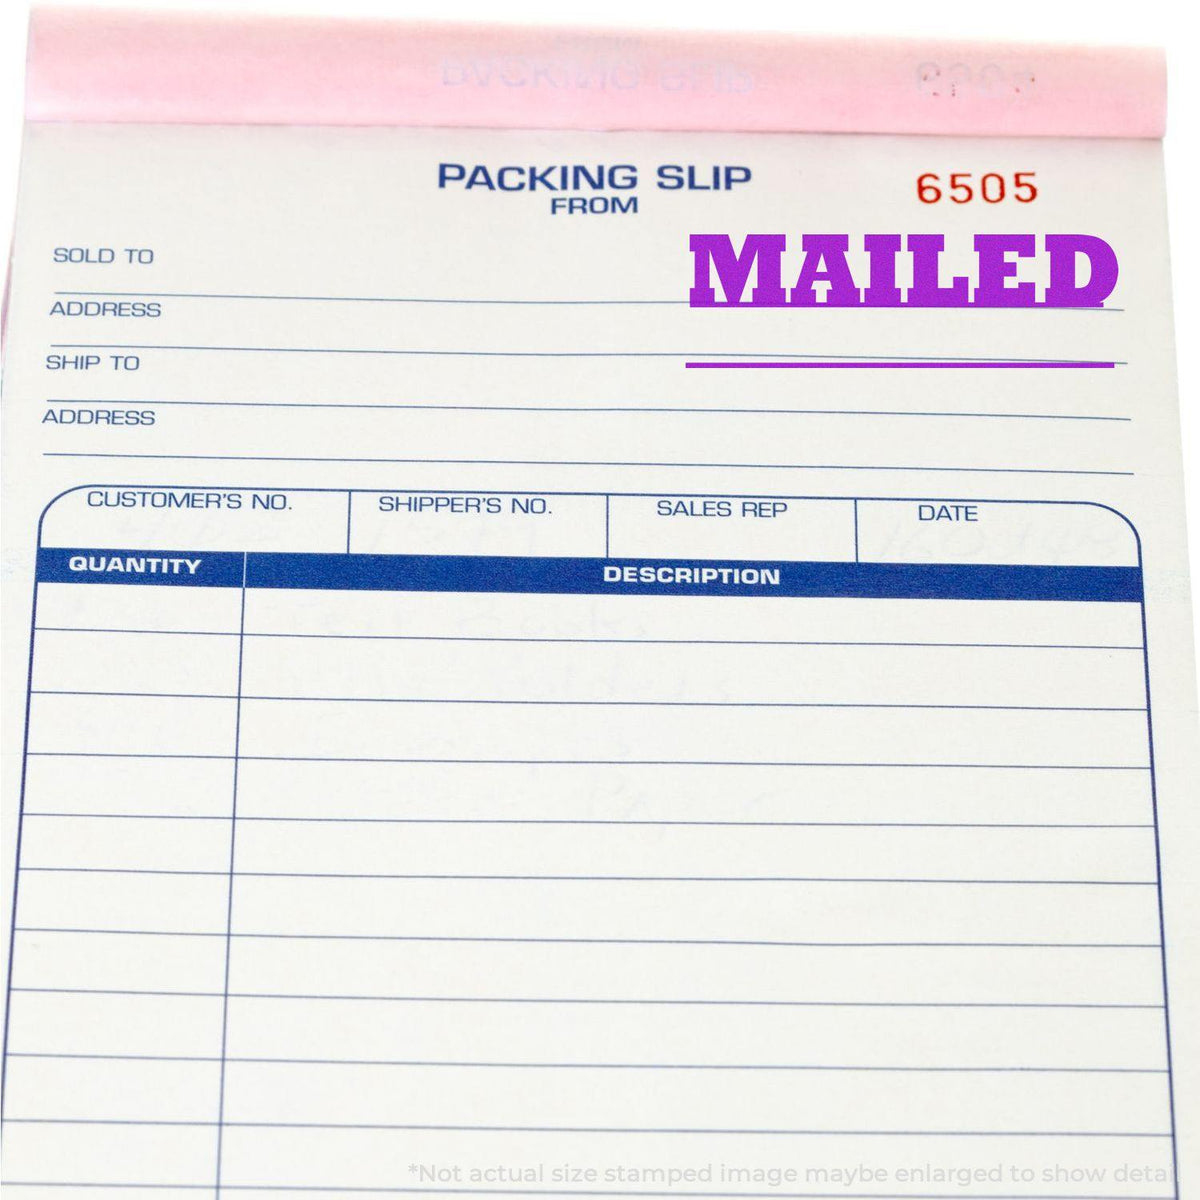 Large Mailed with Date Line Rubber Stamp In Use Photo